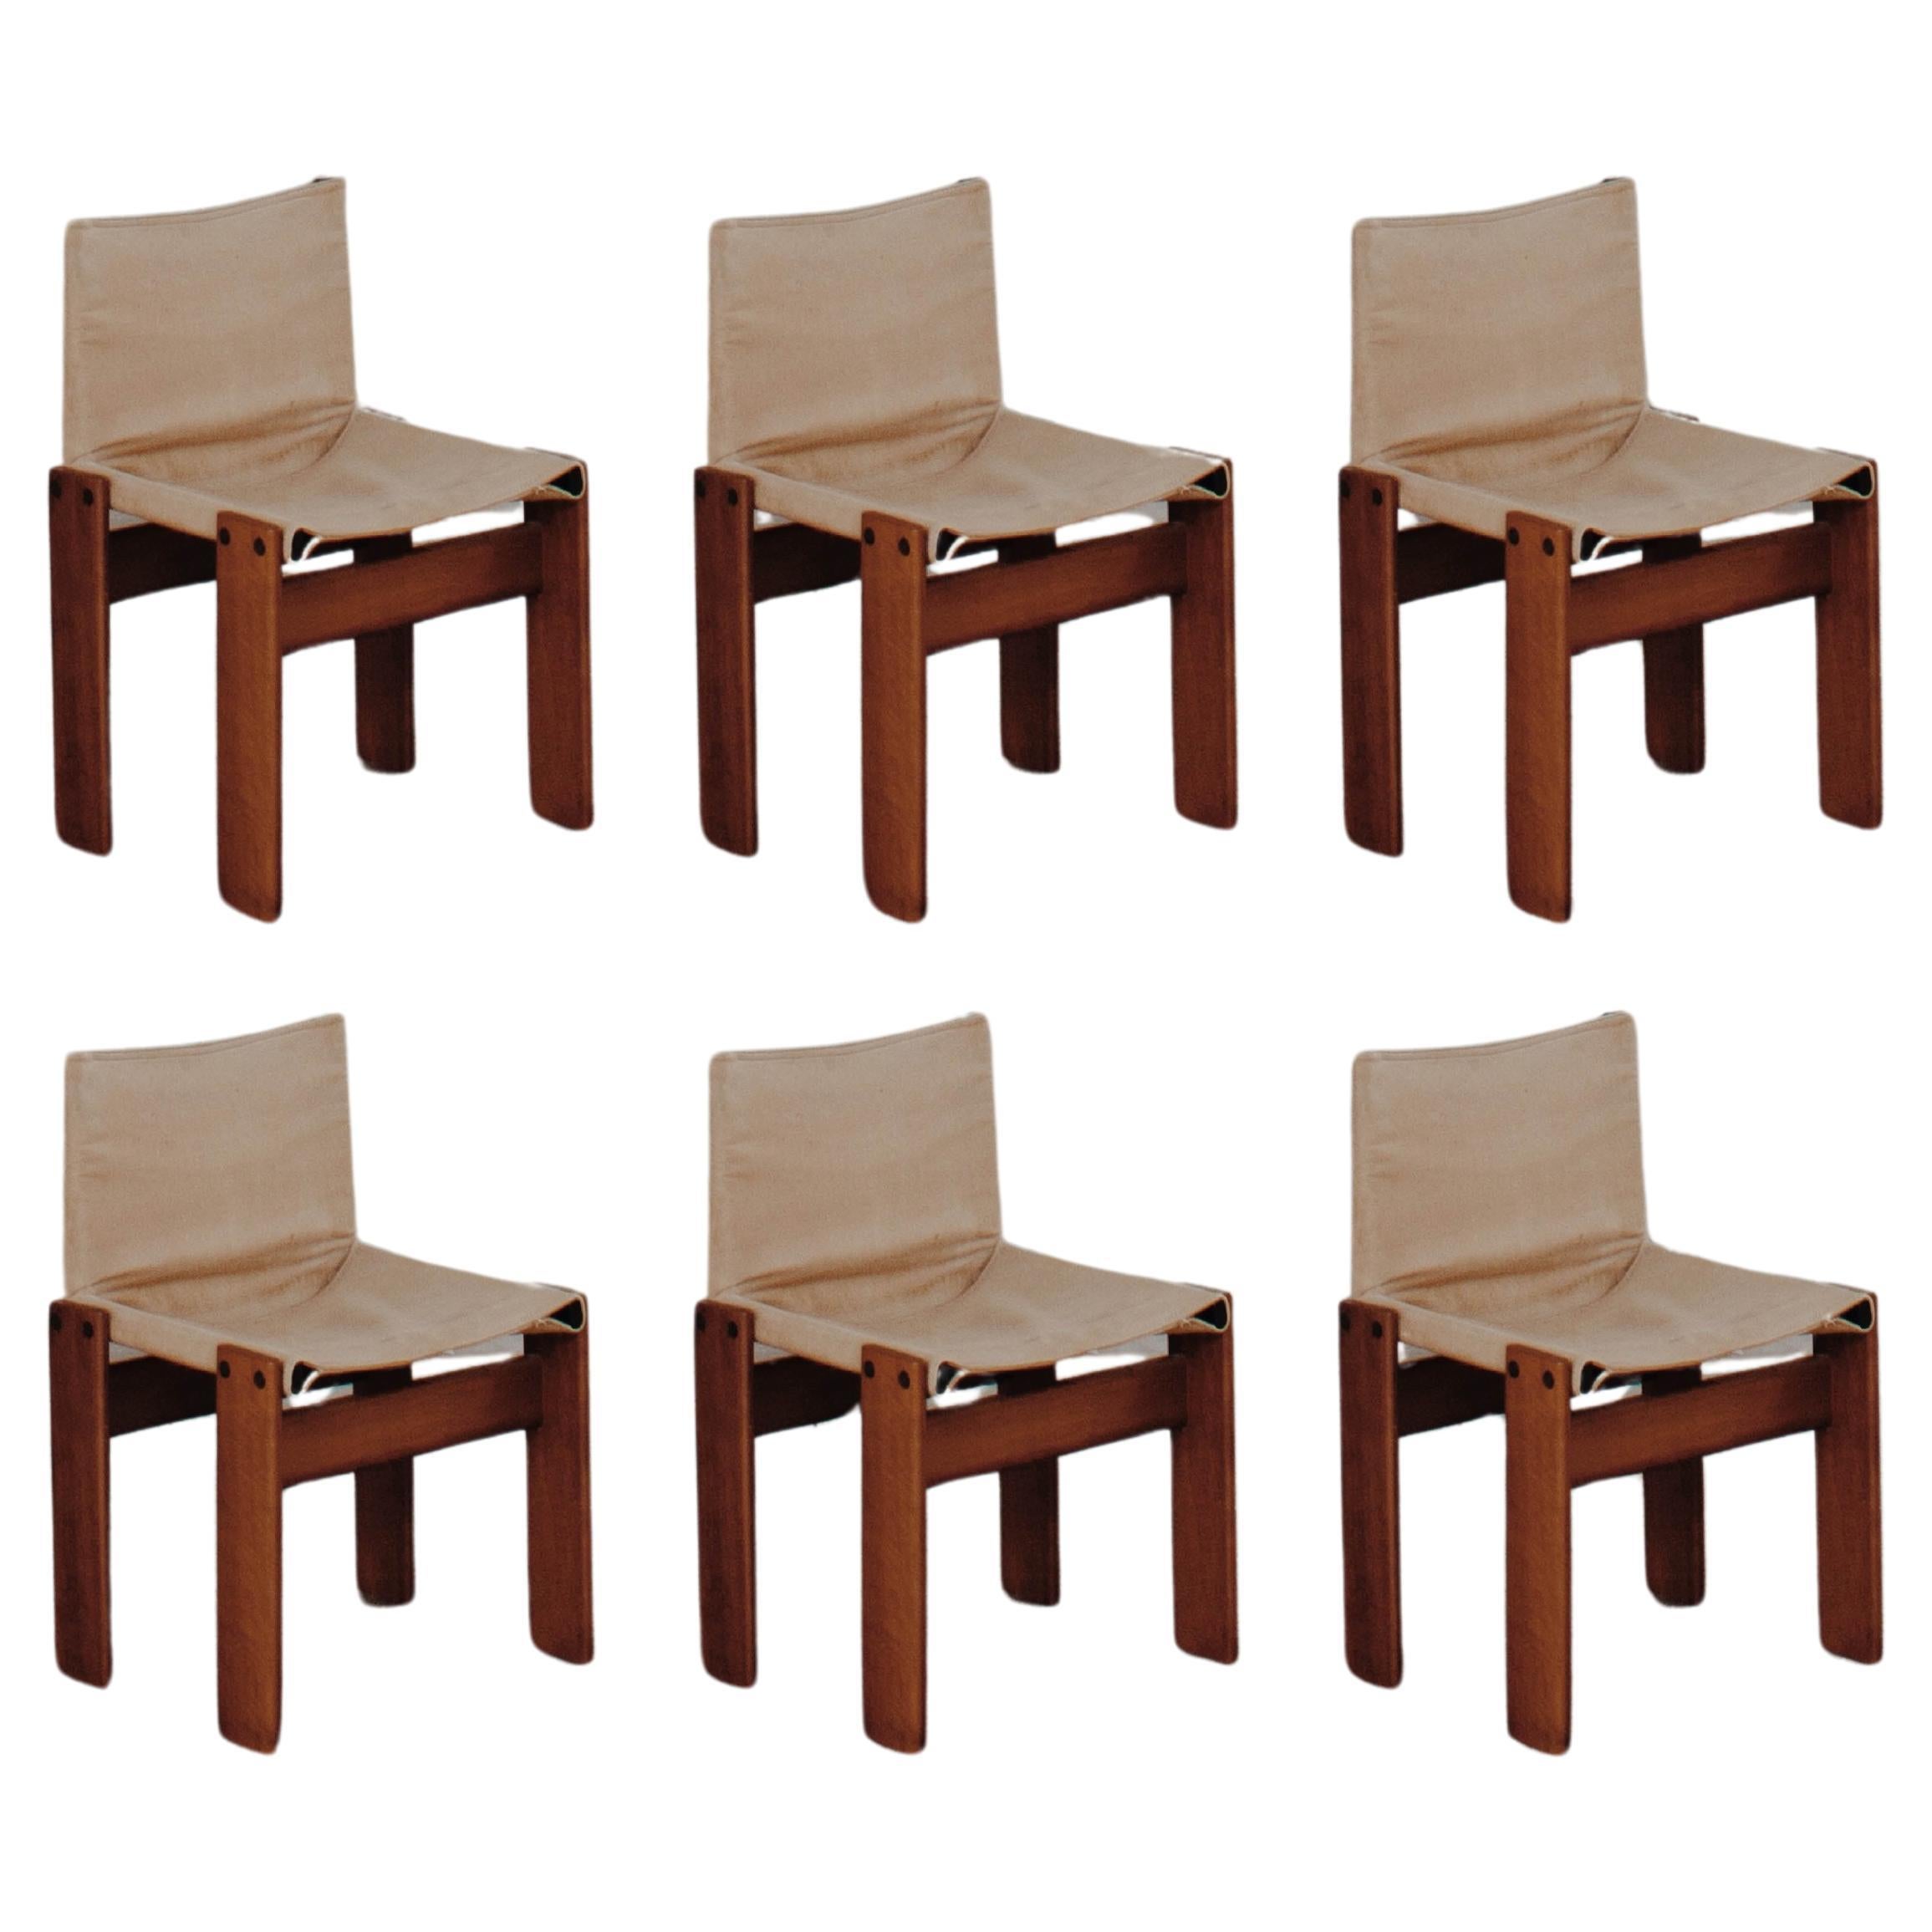 Afra & Tobia Scarpa "Monk" Chairs for Molteni, 1974, Set of 6 For Sale